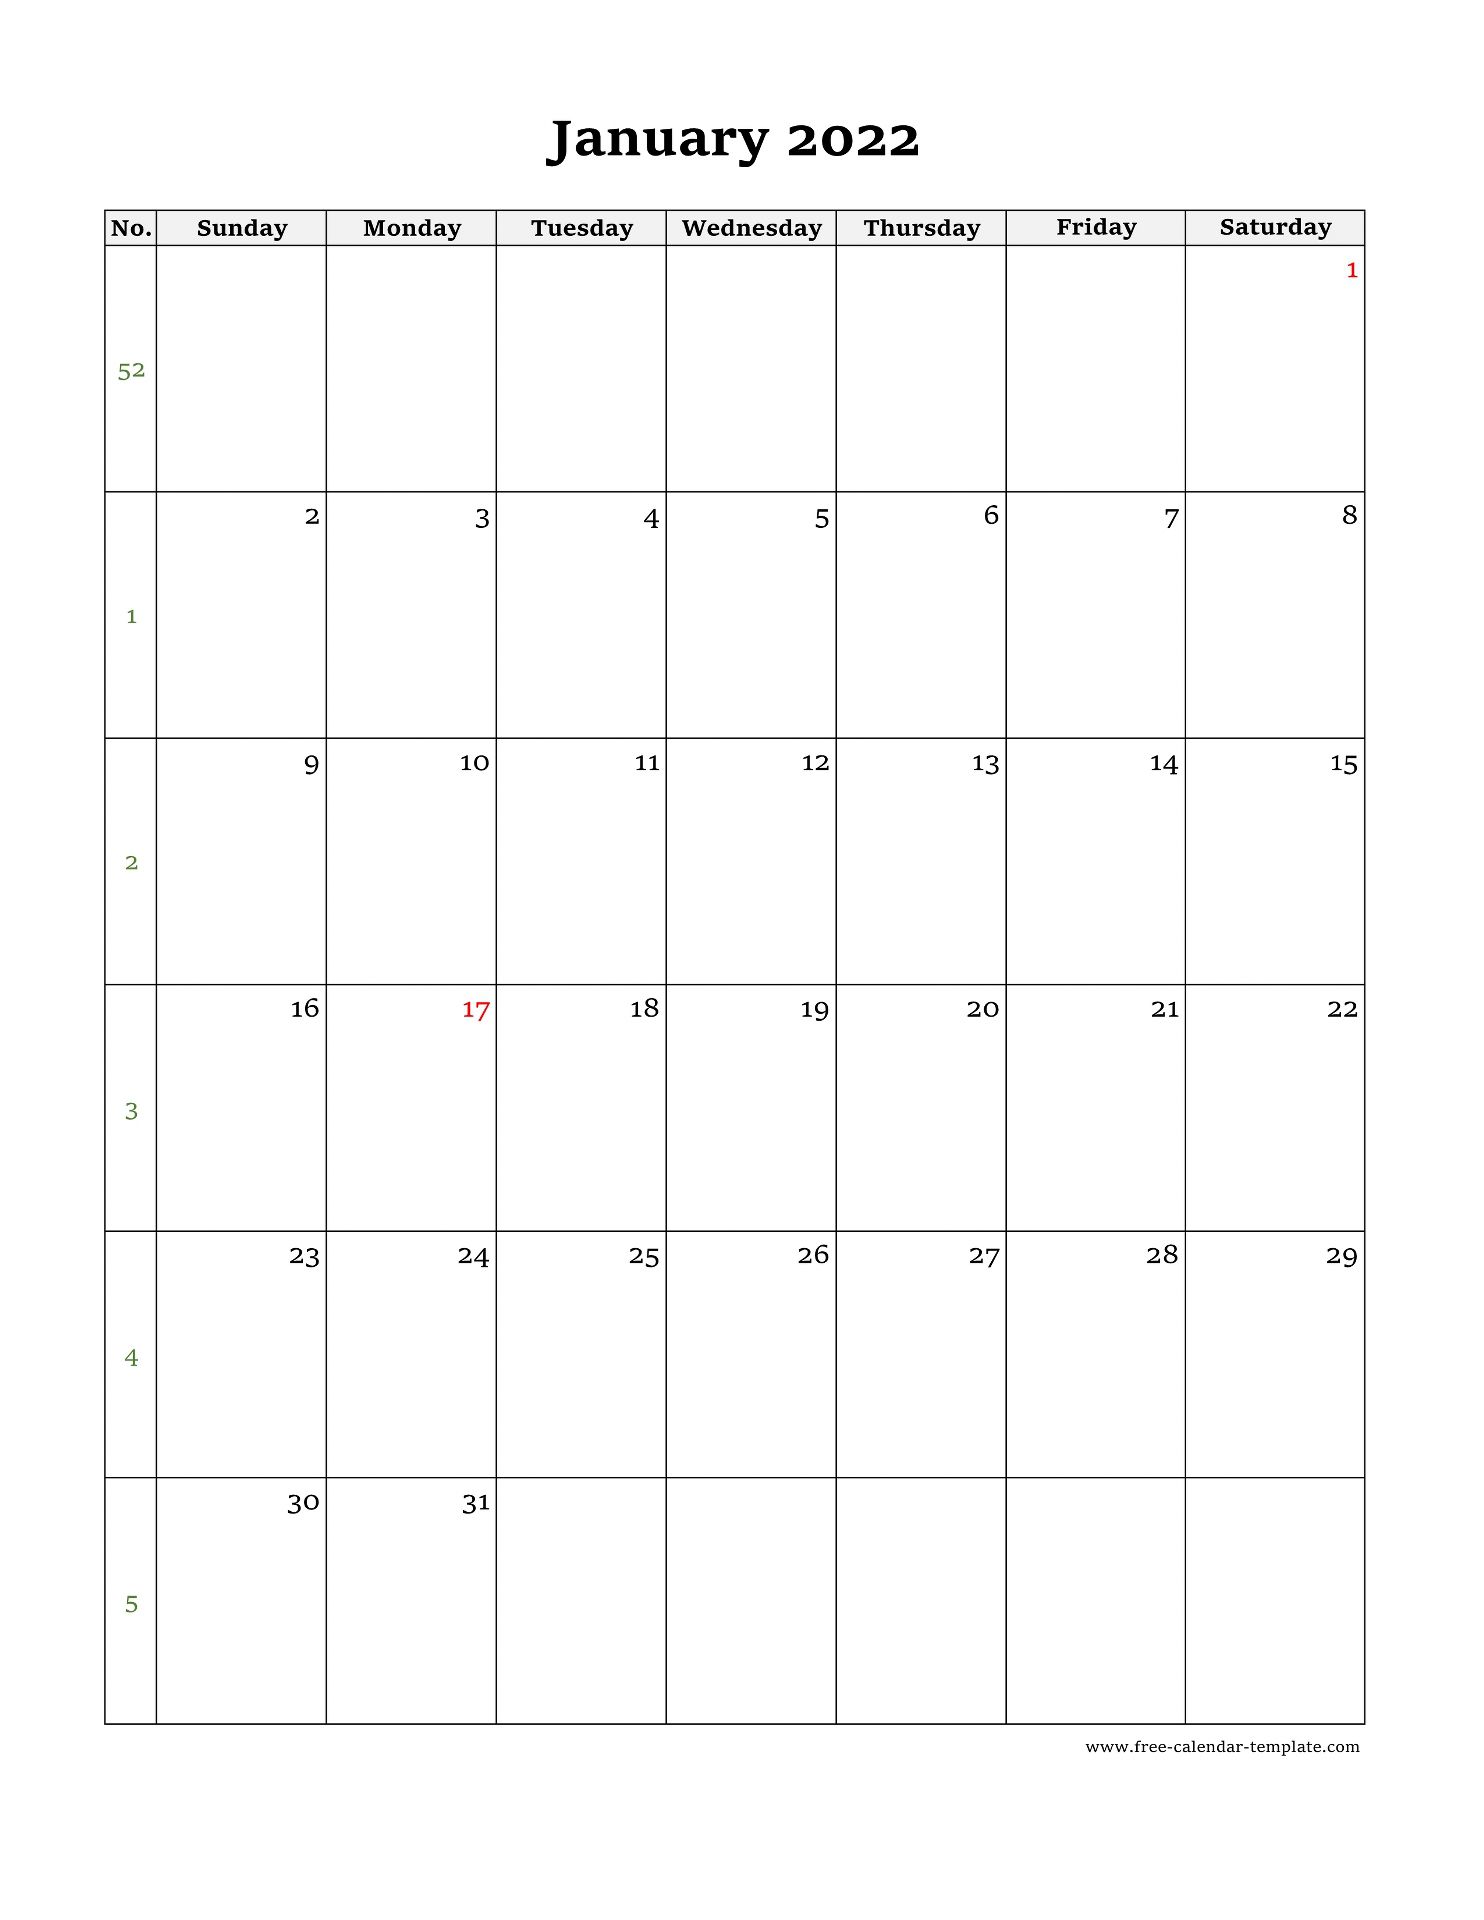 monthly-calendar-2022-simple-design-with-large-box-on-each-day-for